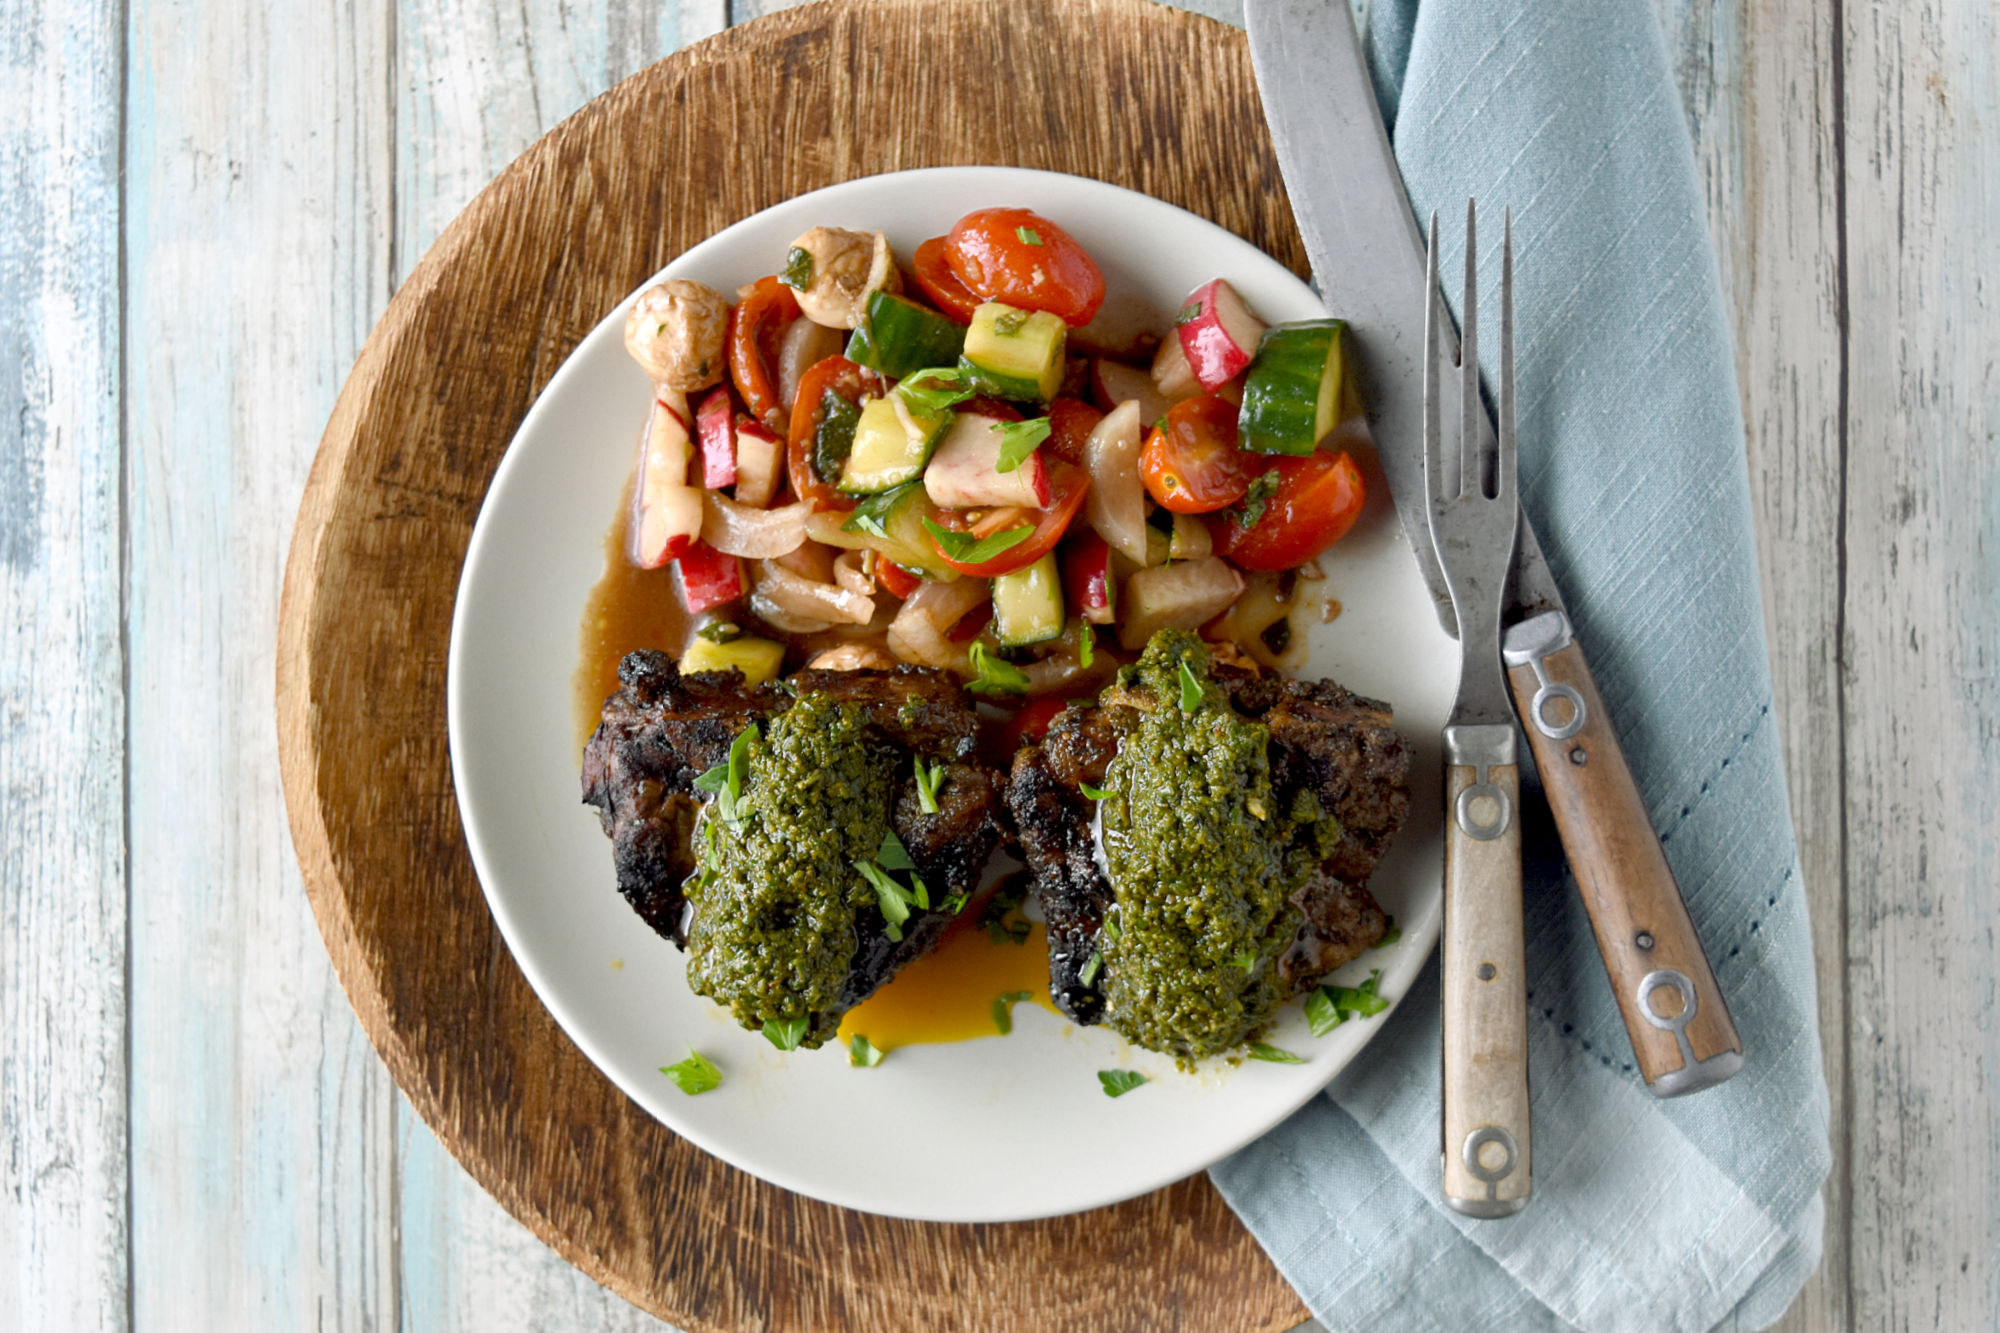 Green Harissa Grilled Lamb Chops have an herb filled delicious sauce with a kick on top of perfectly grilled lamb chops. This green harissa contains spinach, parsley, mint, and oregano and no cilantro. #HerbWeek #greenharissa #grilledlamb #spicysauce #freshherbs
